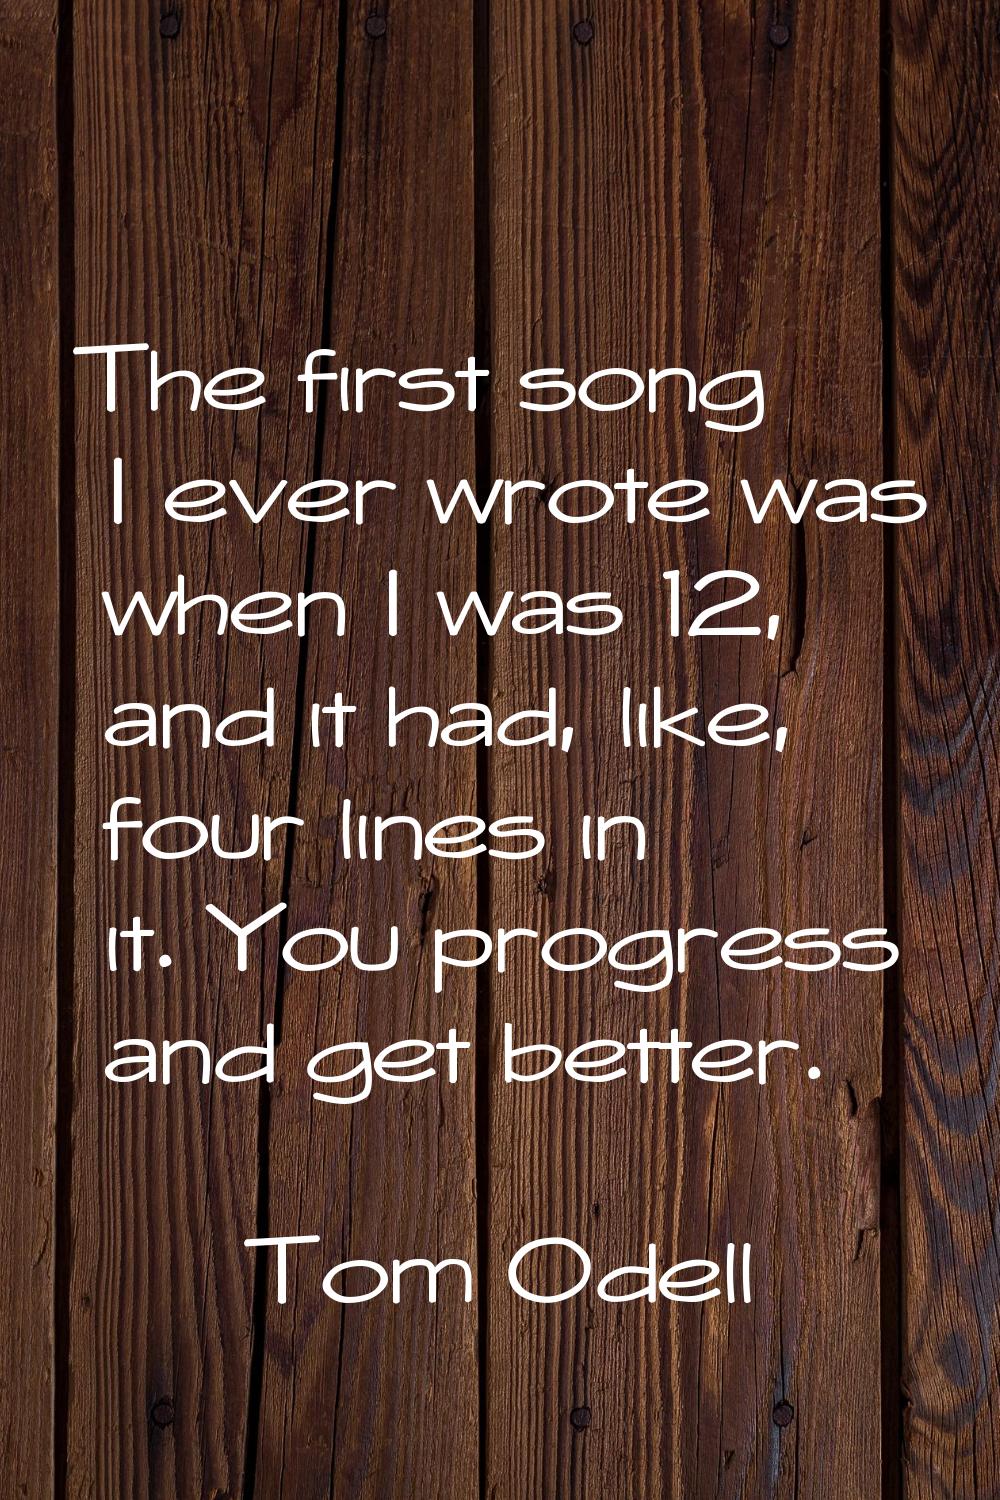 The first song I ever wrote was when I was 12, and it had, like, four lines in it. You progress and